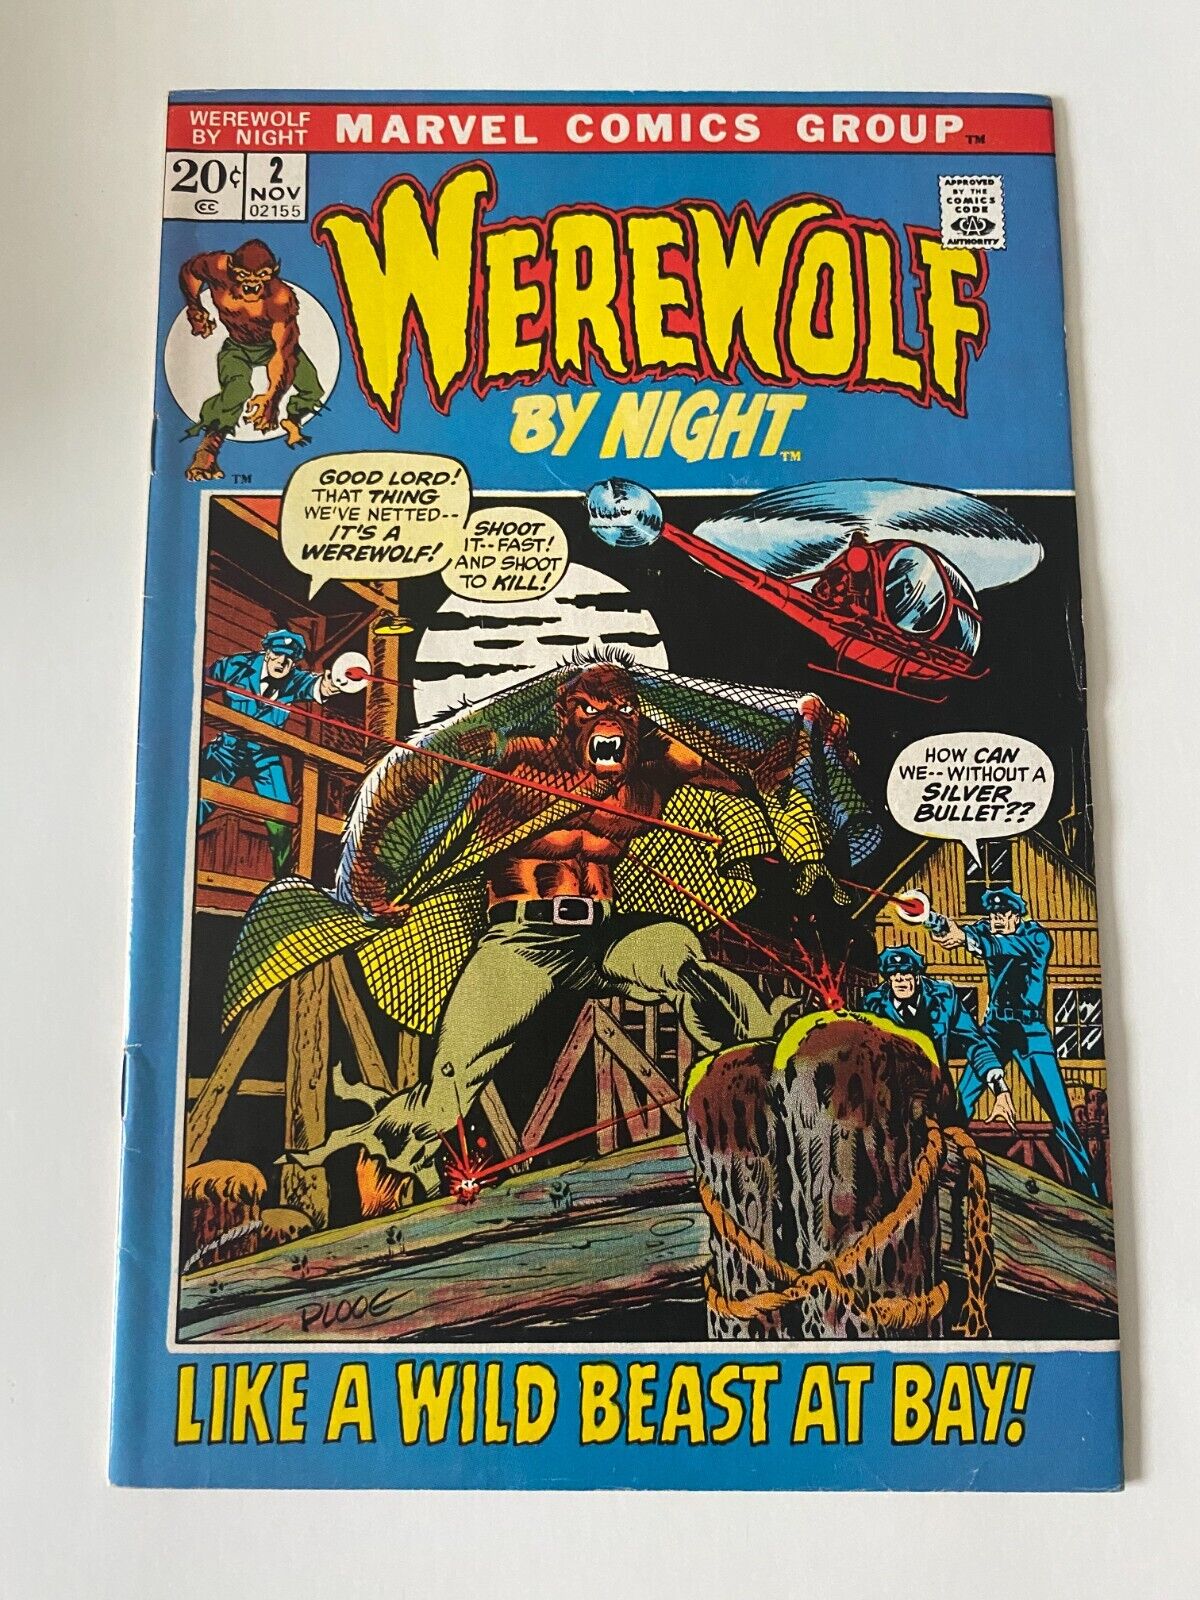 Marvel WEREWOLF BY NIGHT Single Issue Comics 1972-1977 – $10-$40 ea. – YOU PICK